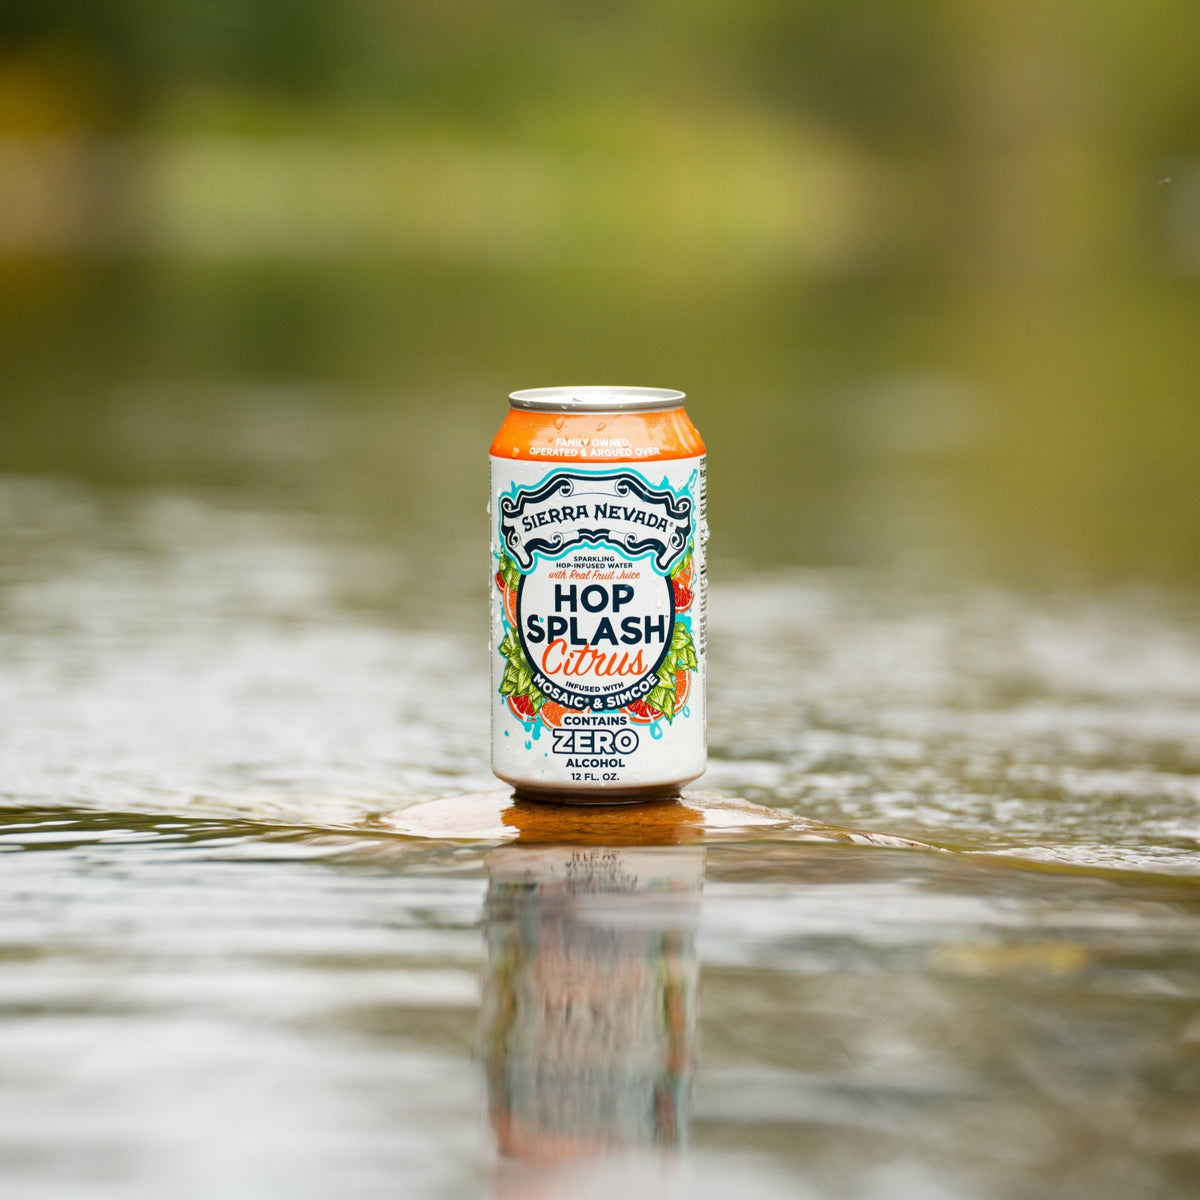 Sierra Nevada Brewing Co. Hop Splash Citrus Non-Alcoholic Sparkling Hop Water - A can of refreshing Hop Splash Citrus sits on a flat stone surrounded by a gently moving river